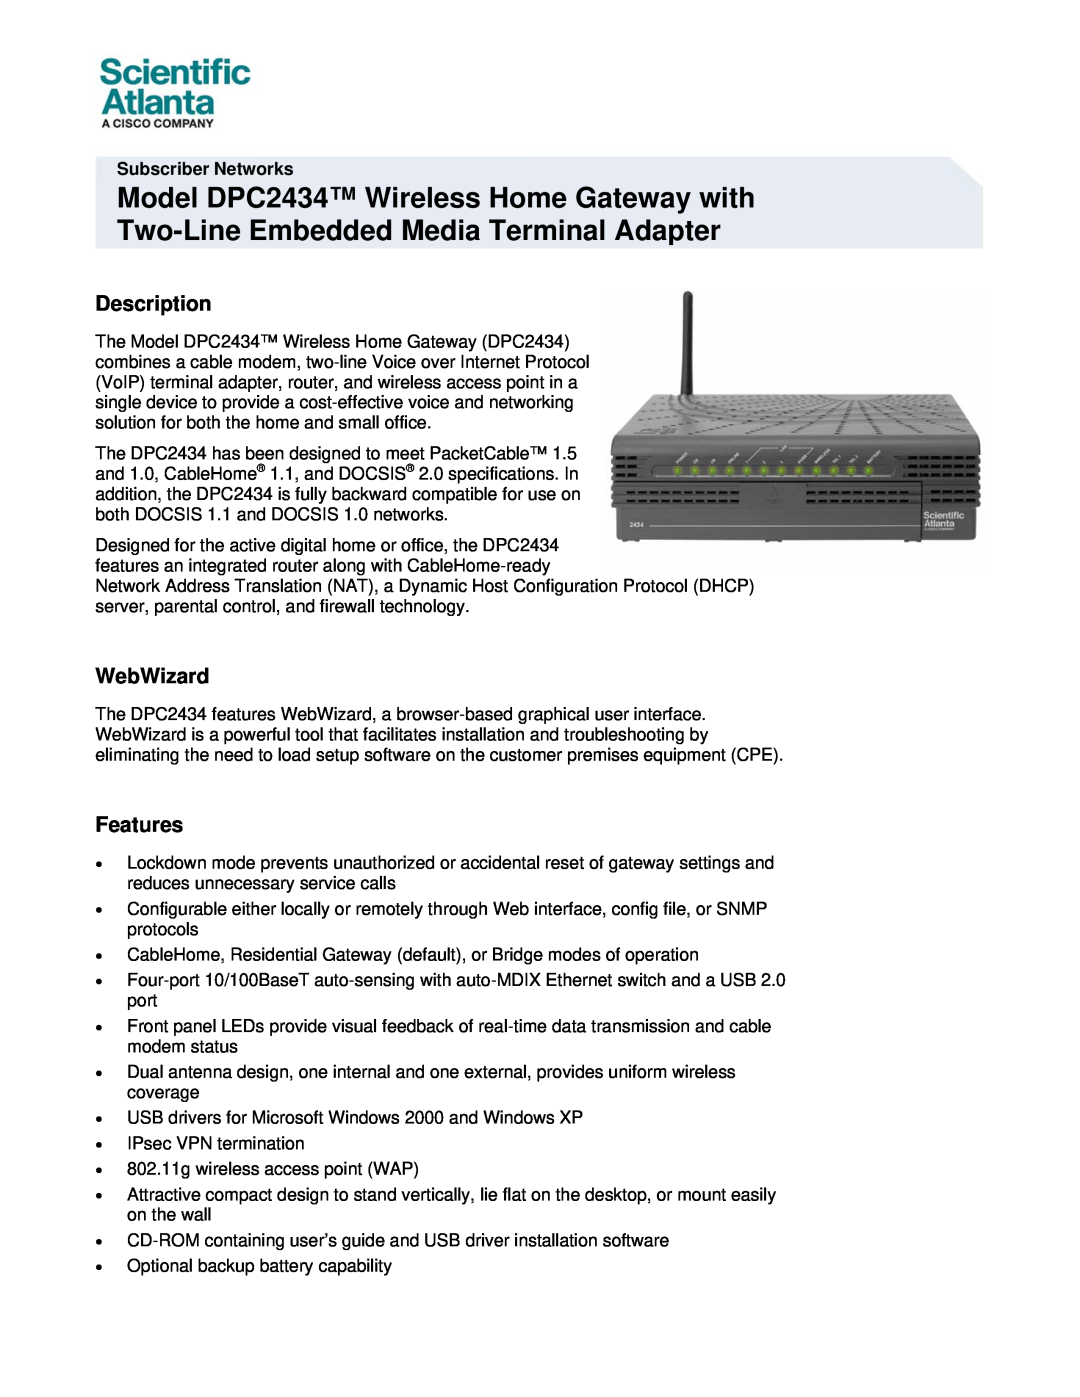 Cisco Systems DPC2434 specifications Description, WebWizard, Features, Subscriber Networks 